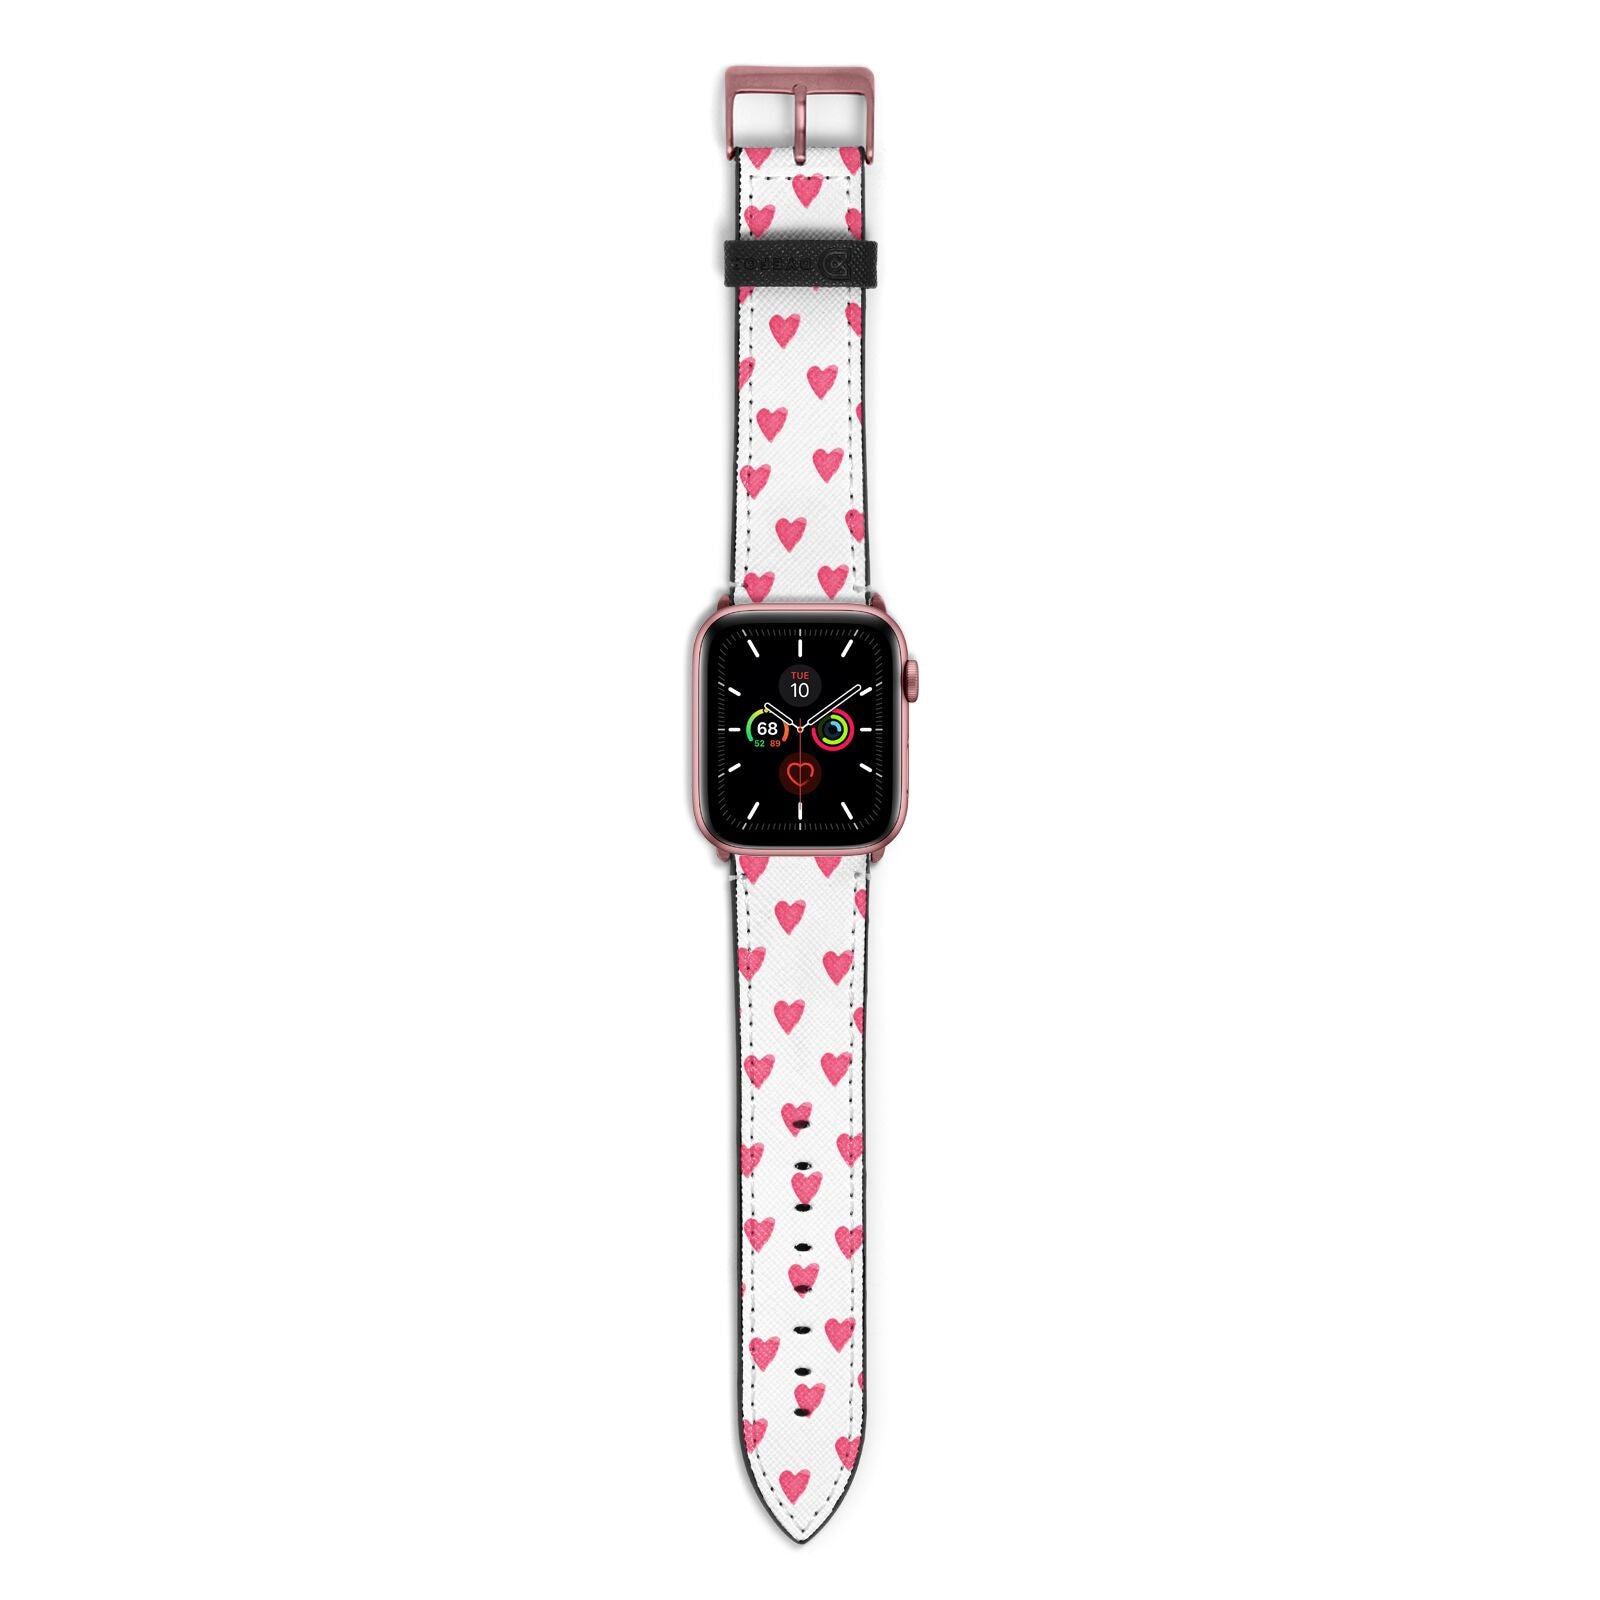 Heart Patterned Apple Watch Strap with Rose Gold Hardware